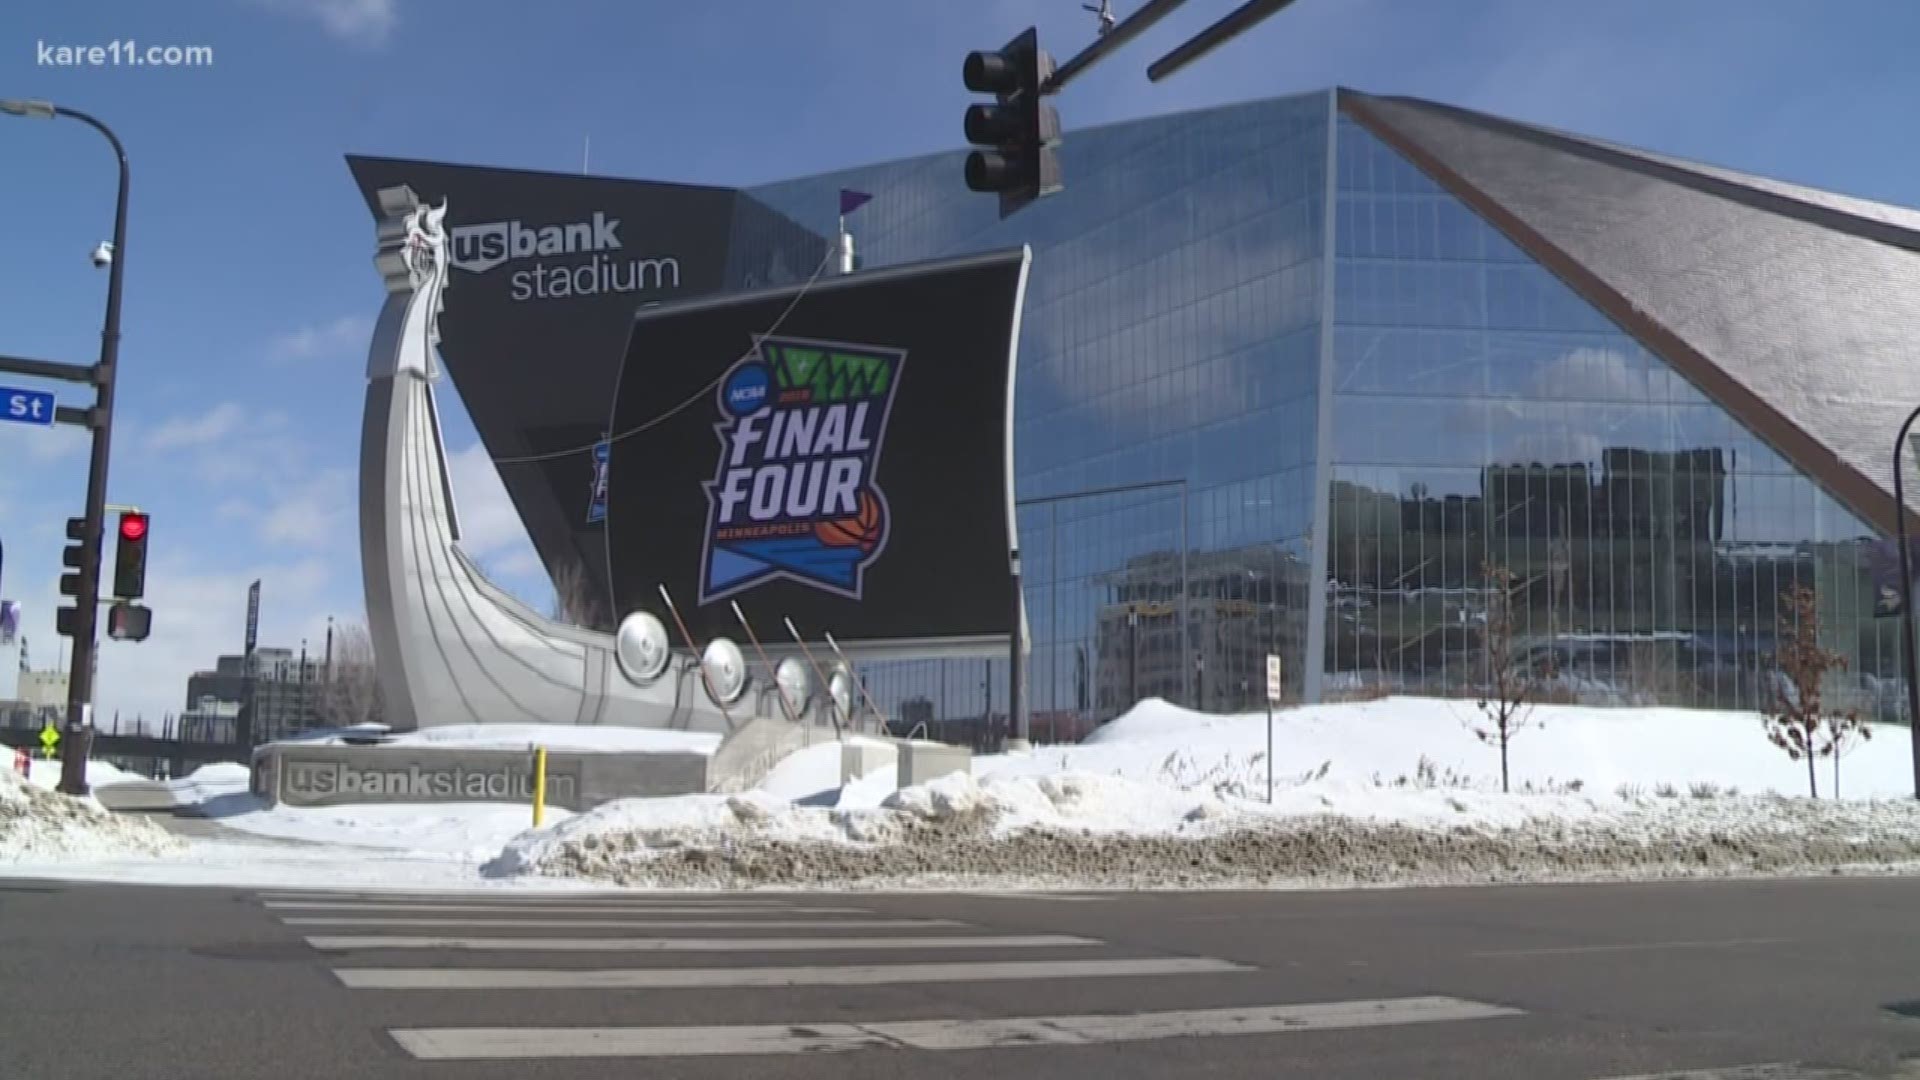 Though this was the last chance to work the Final Four, SMG will be hiring for more events, like the X-Games, in the coming months click  www.usbankstadium.com/jobs for more information.